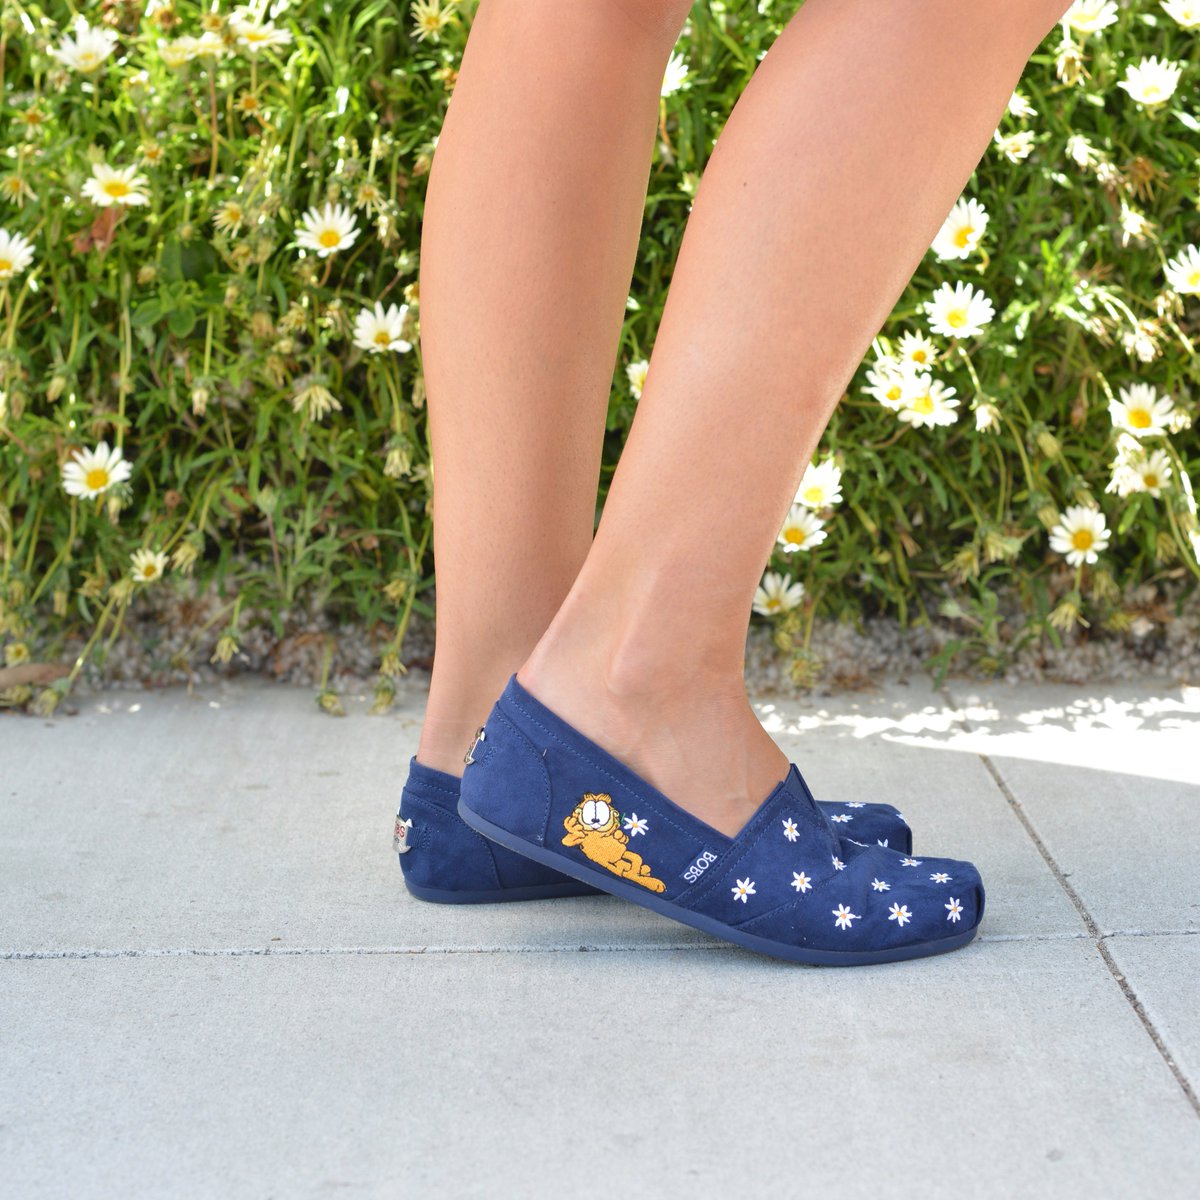 dealer ondernemen vervangen BOBS from SKECHERS on Twitter: "Our Garfield Daisy Days flats are sure to  put a little Summer in your step! https://t.co/oBffZ2lphF #Skechers # Garfield https://t.co/4xx1gfRsJ5" / Twitter